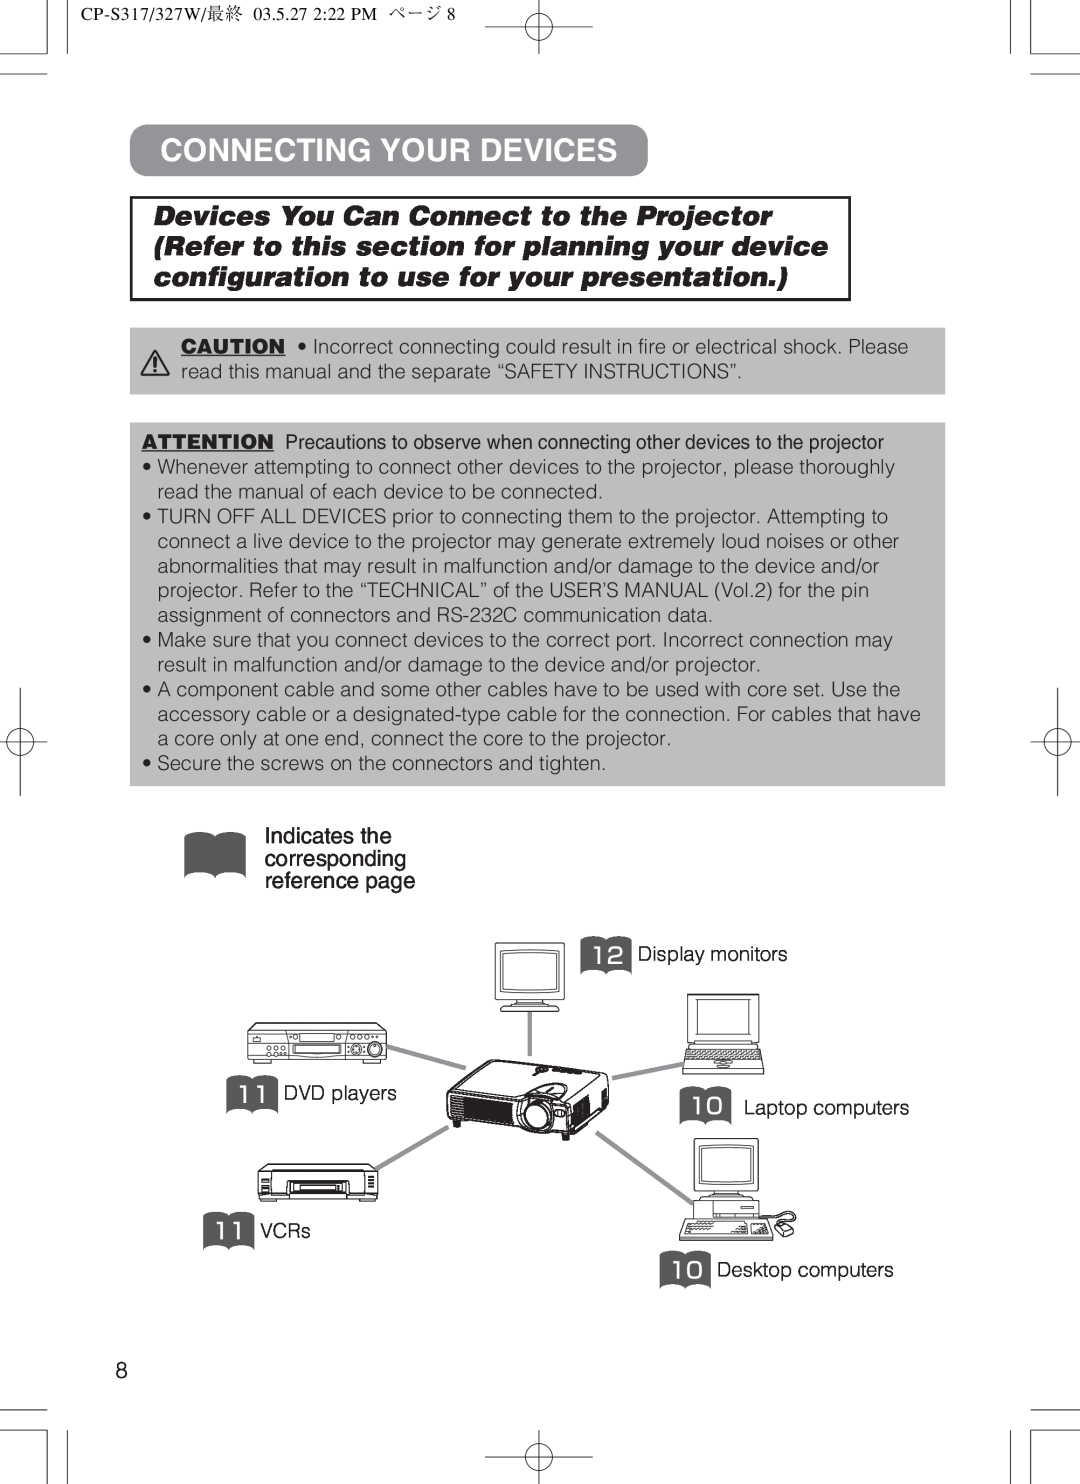 Hitachi cp-s318 user manual Connecting Your Devices, Indicates the corresponding reference page 